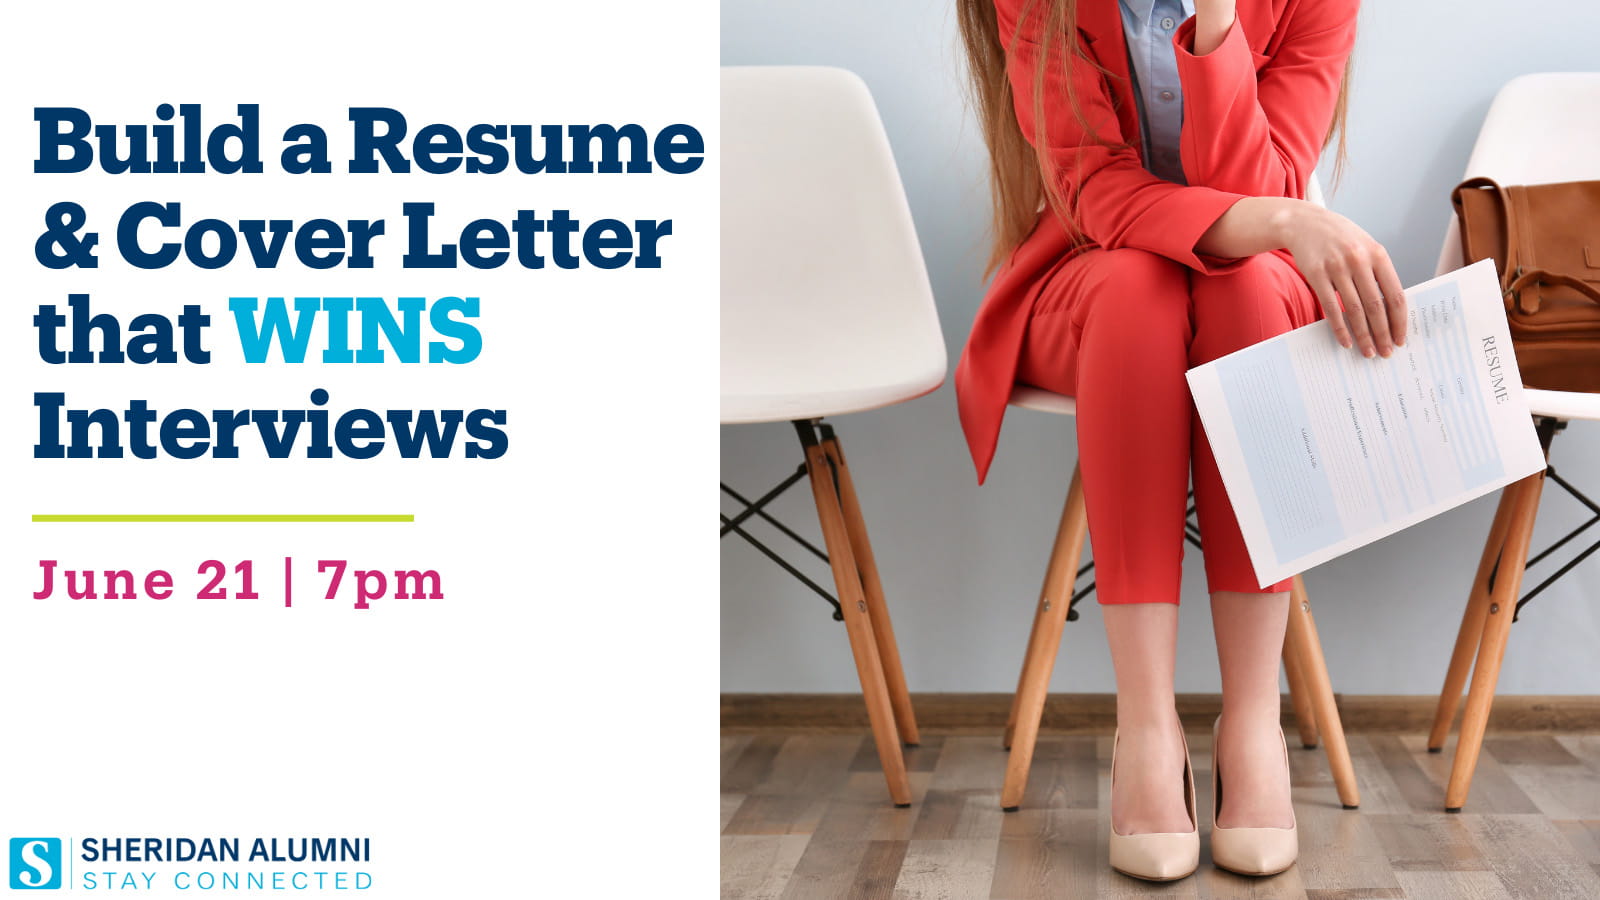 Build a Resume & Cover Letter that WINS Interviews | June 21 | 7 p.m. | Sheridan Alumni | Stay Connected